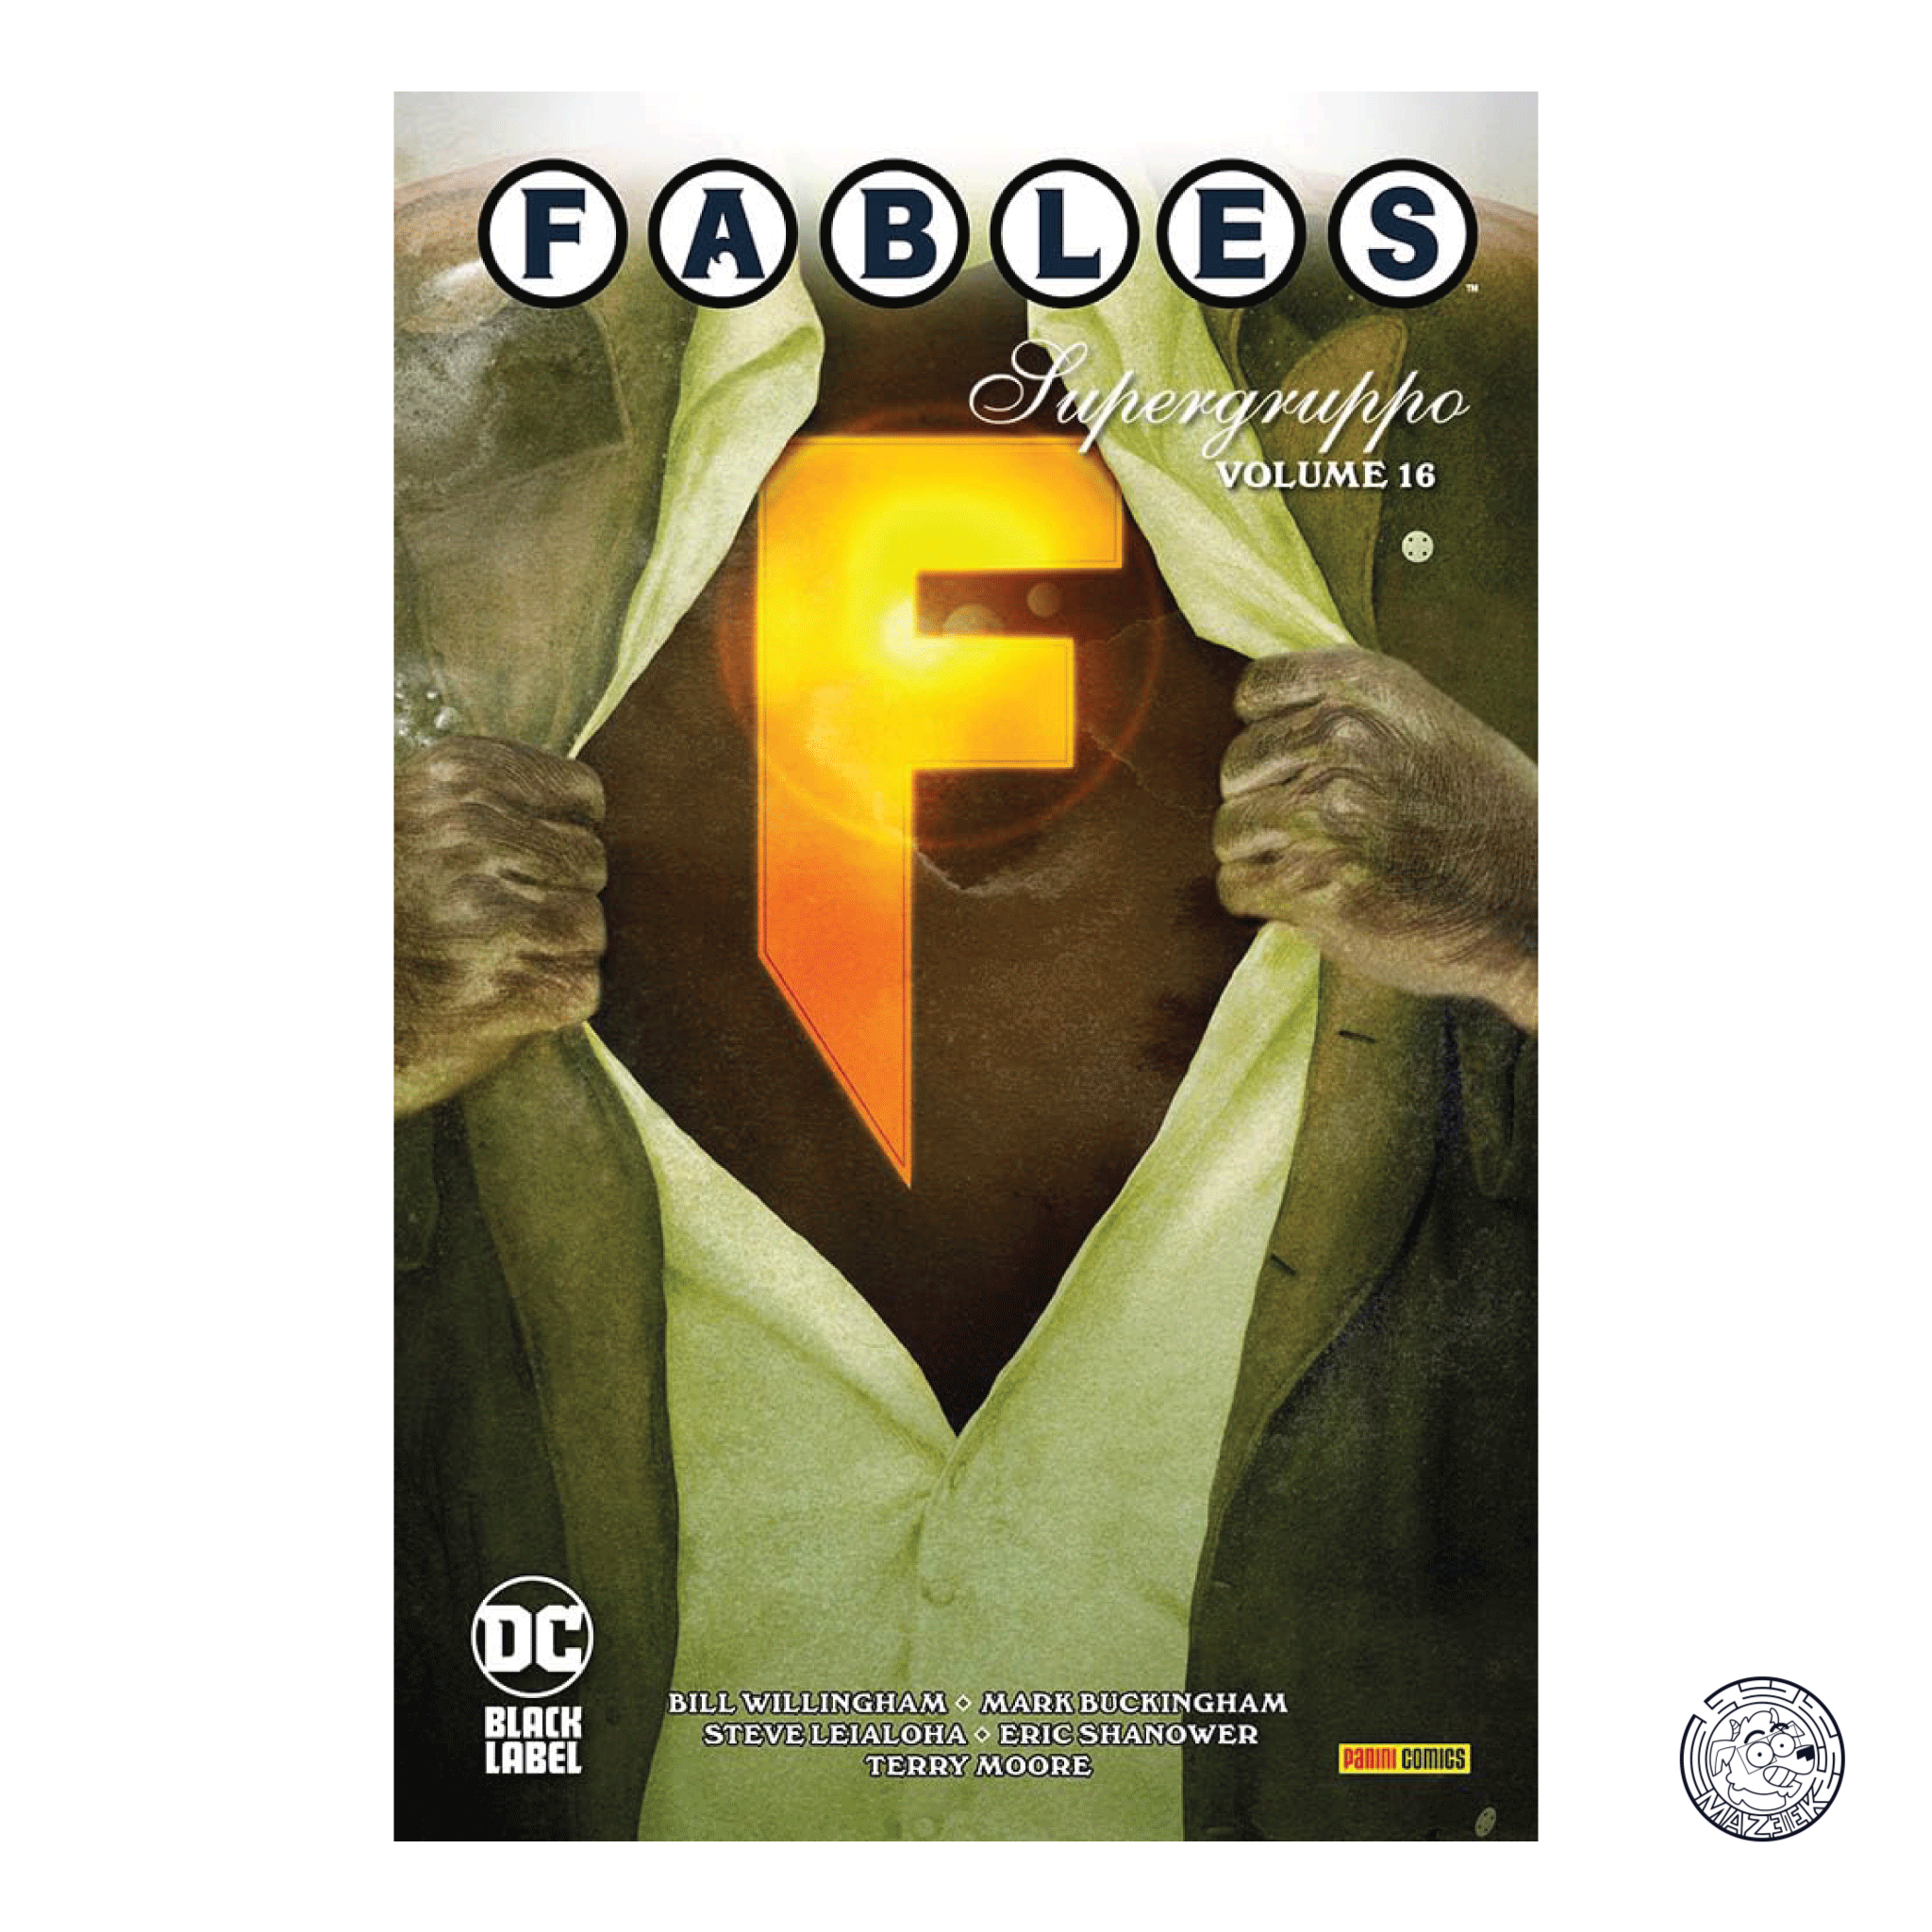 Fables 16 – Supergroup